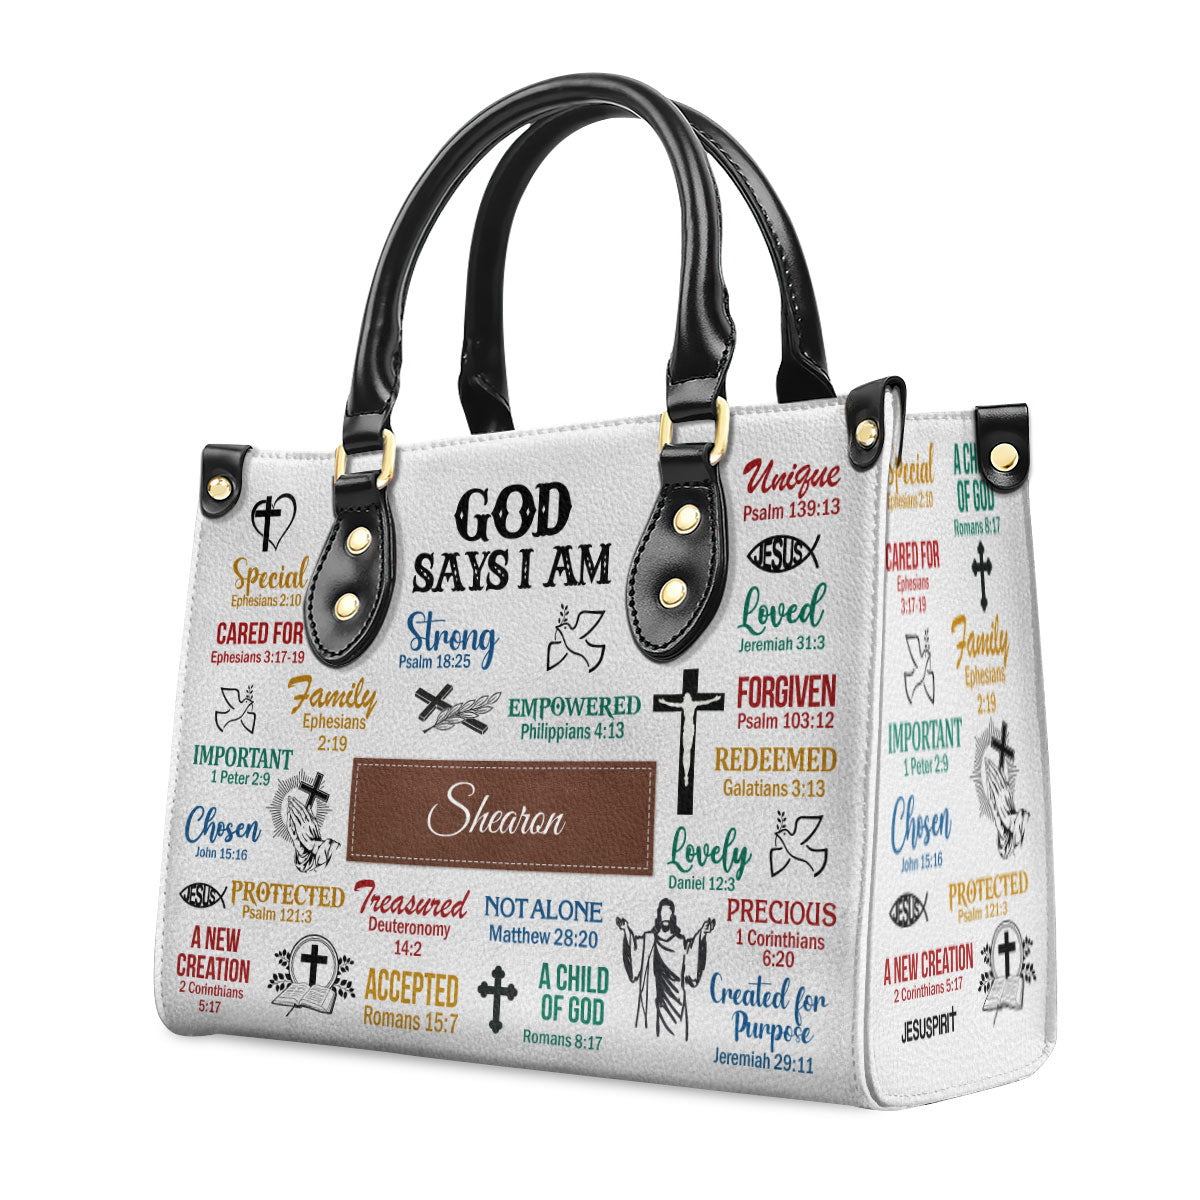 Bible verse tote bags: Be strong and courageous Joshua 1:9 Christian tote  bag | Christian tote bags, Christian tote, Tote